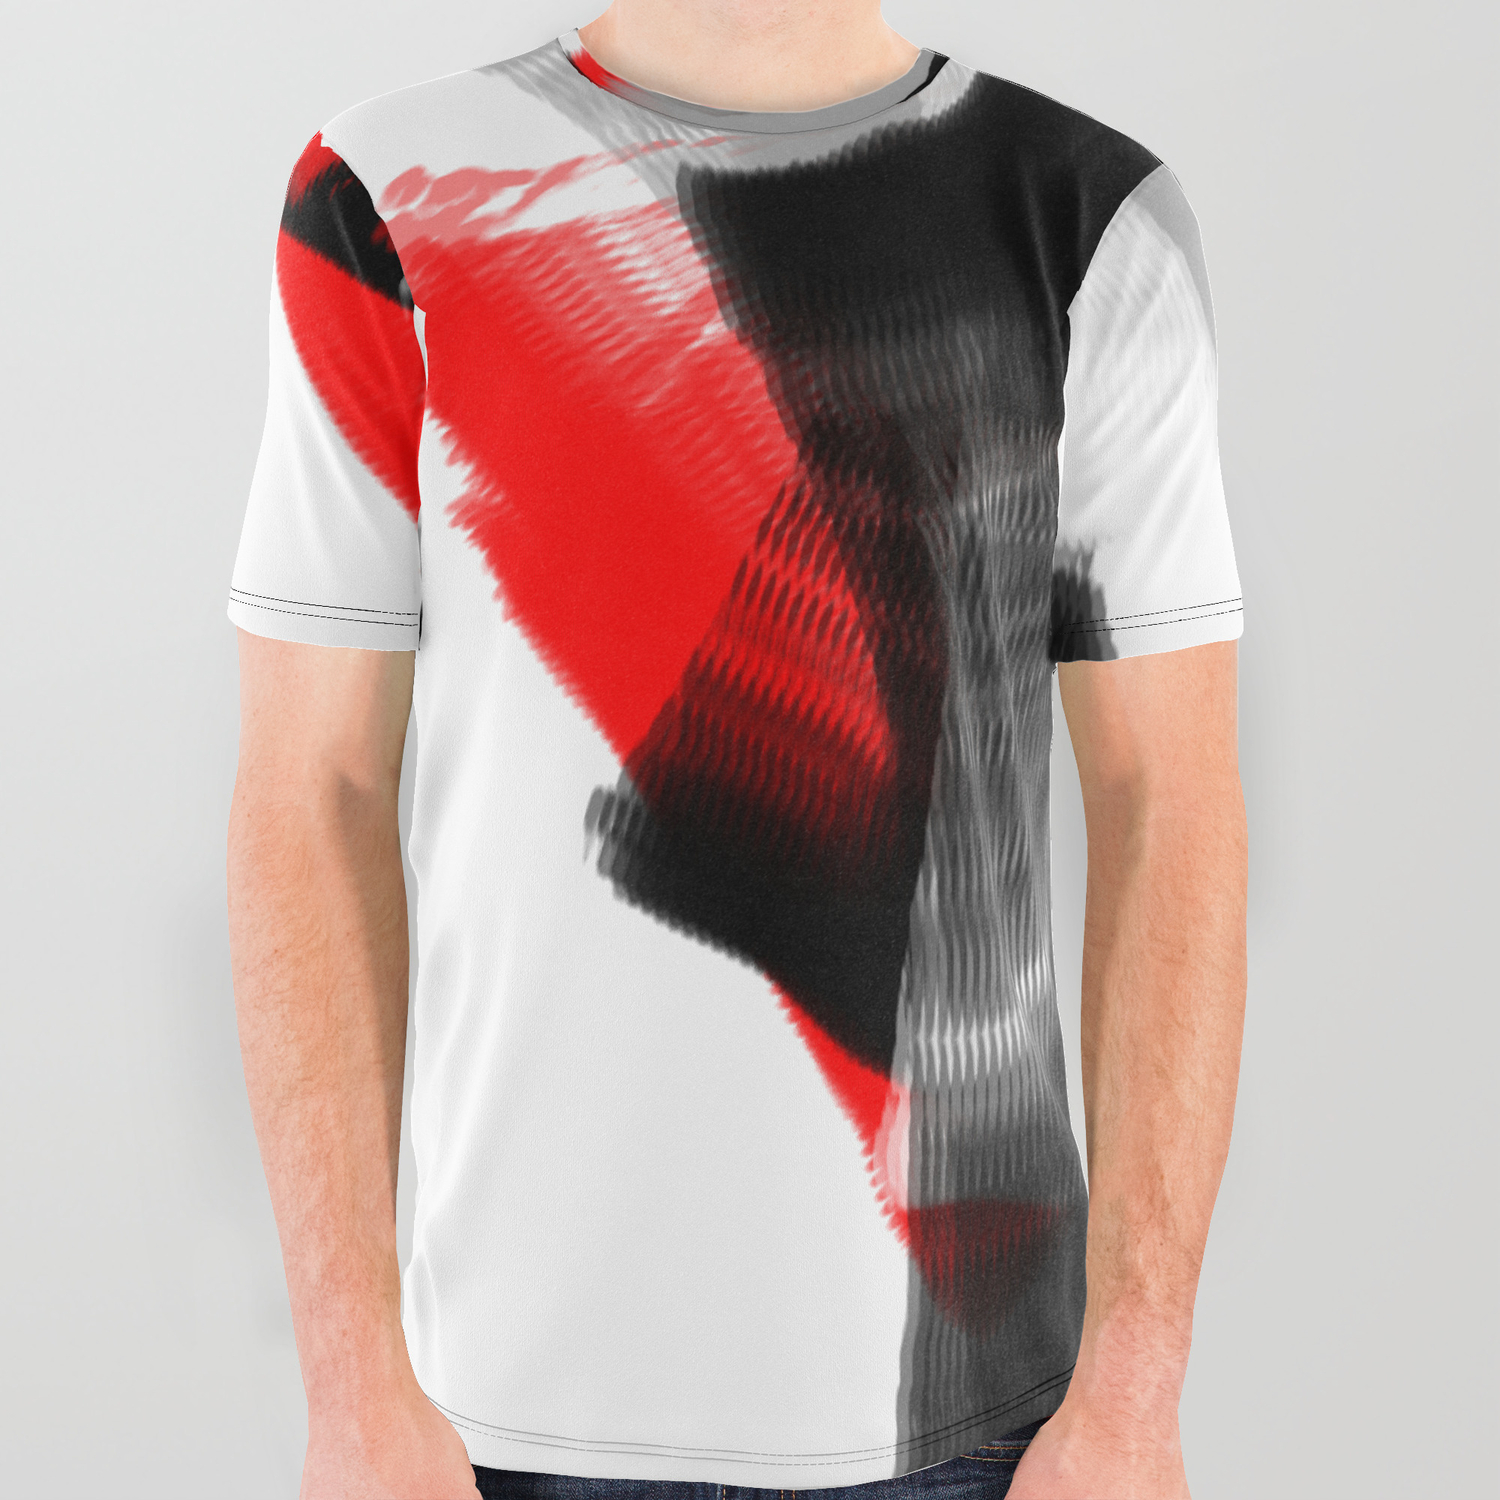 black white and red graphic tee